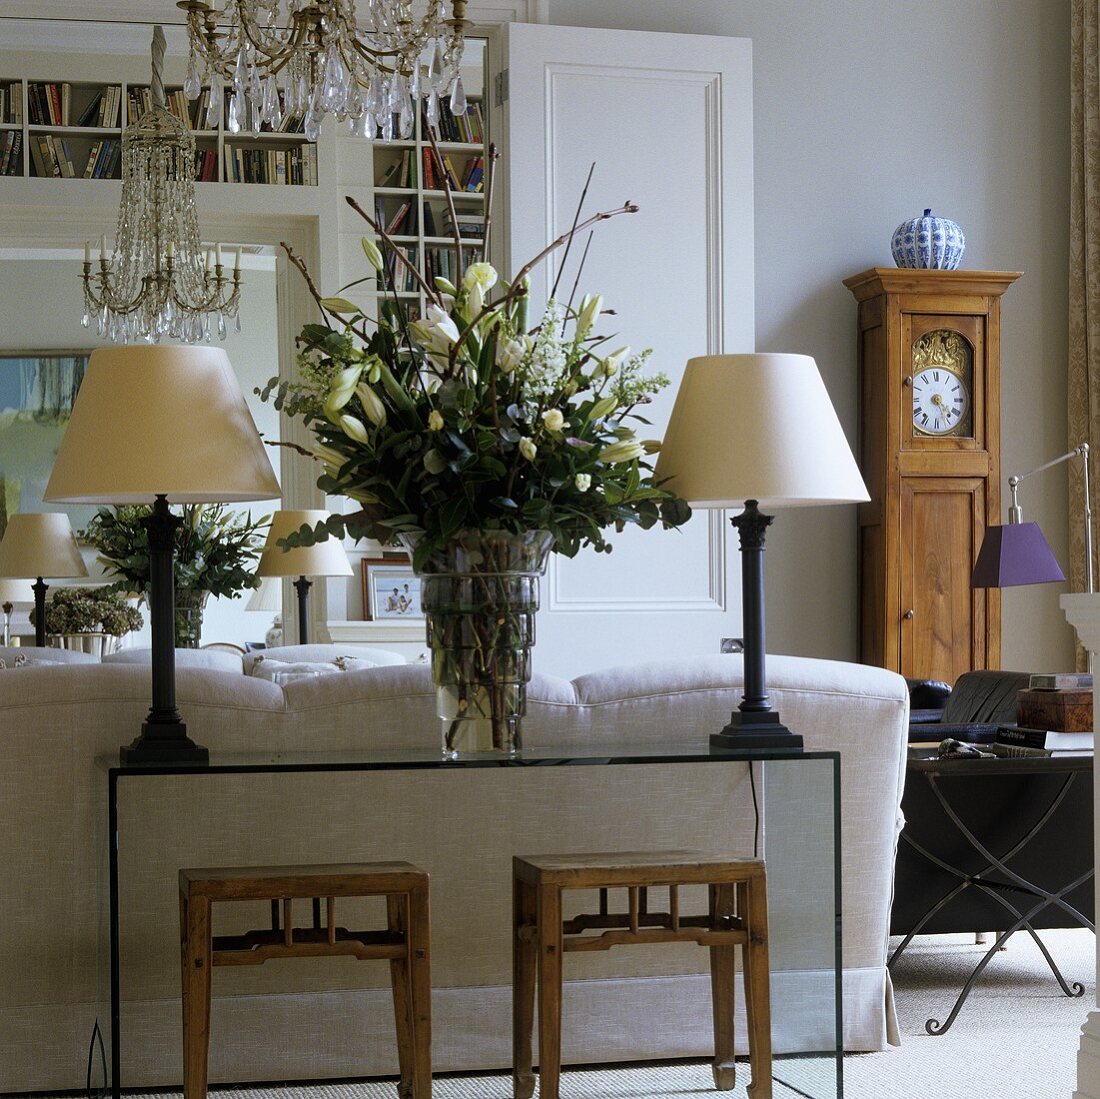 Table lamps with white shades and a bunch of lilies on a glass table with rustic stools and an antique grandfather clock